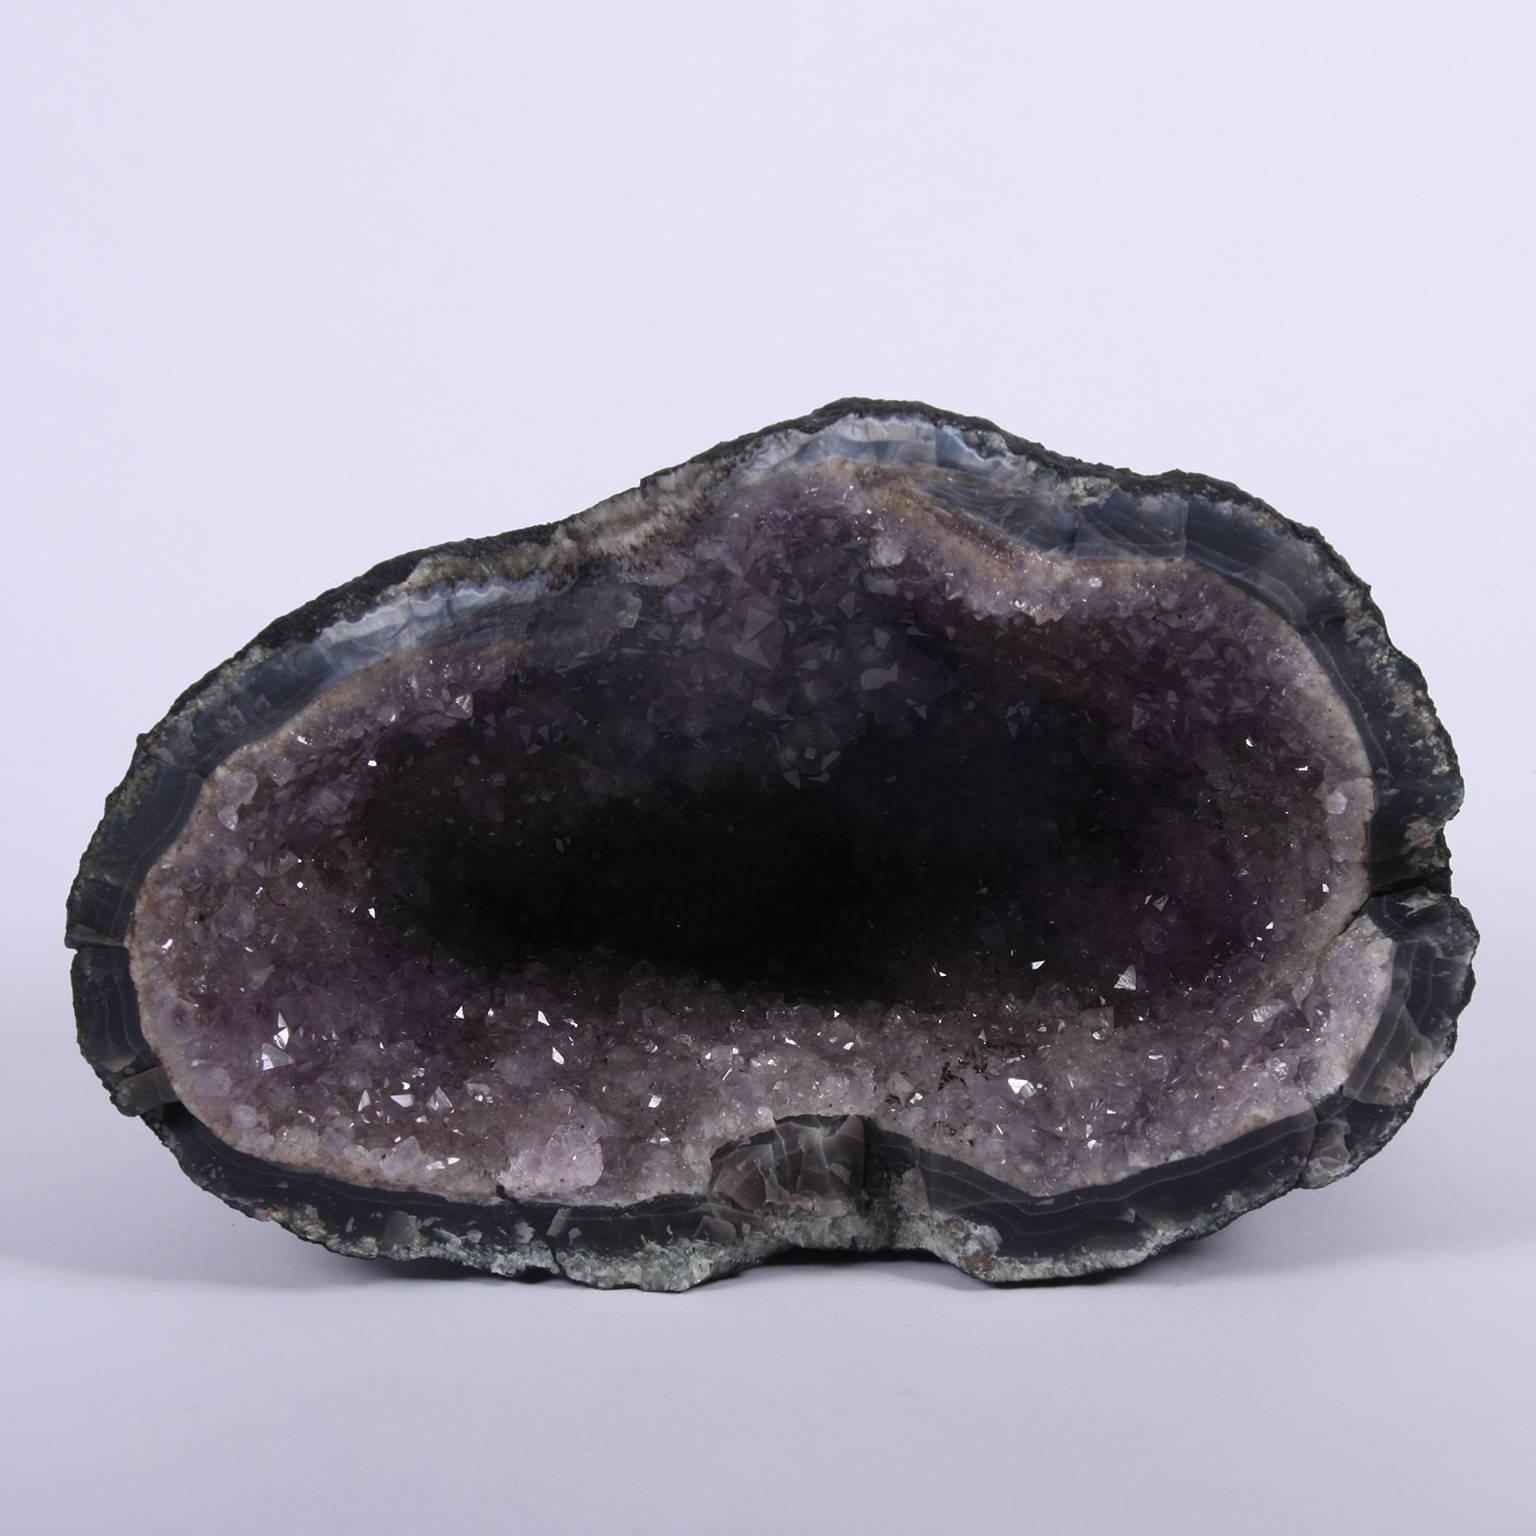 This is a fantastic natural amethyst geode cave (also known as cathedrals or churches). Geodes are rocks that seem plain on the outside but when opened reveal a cavity in the middle filled with beautiful crystals. The general scientific consensus is